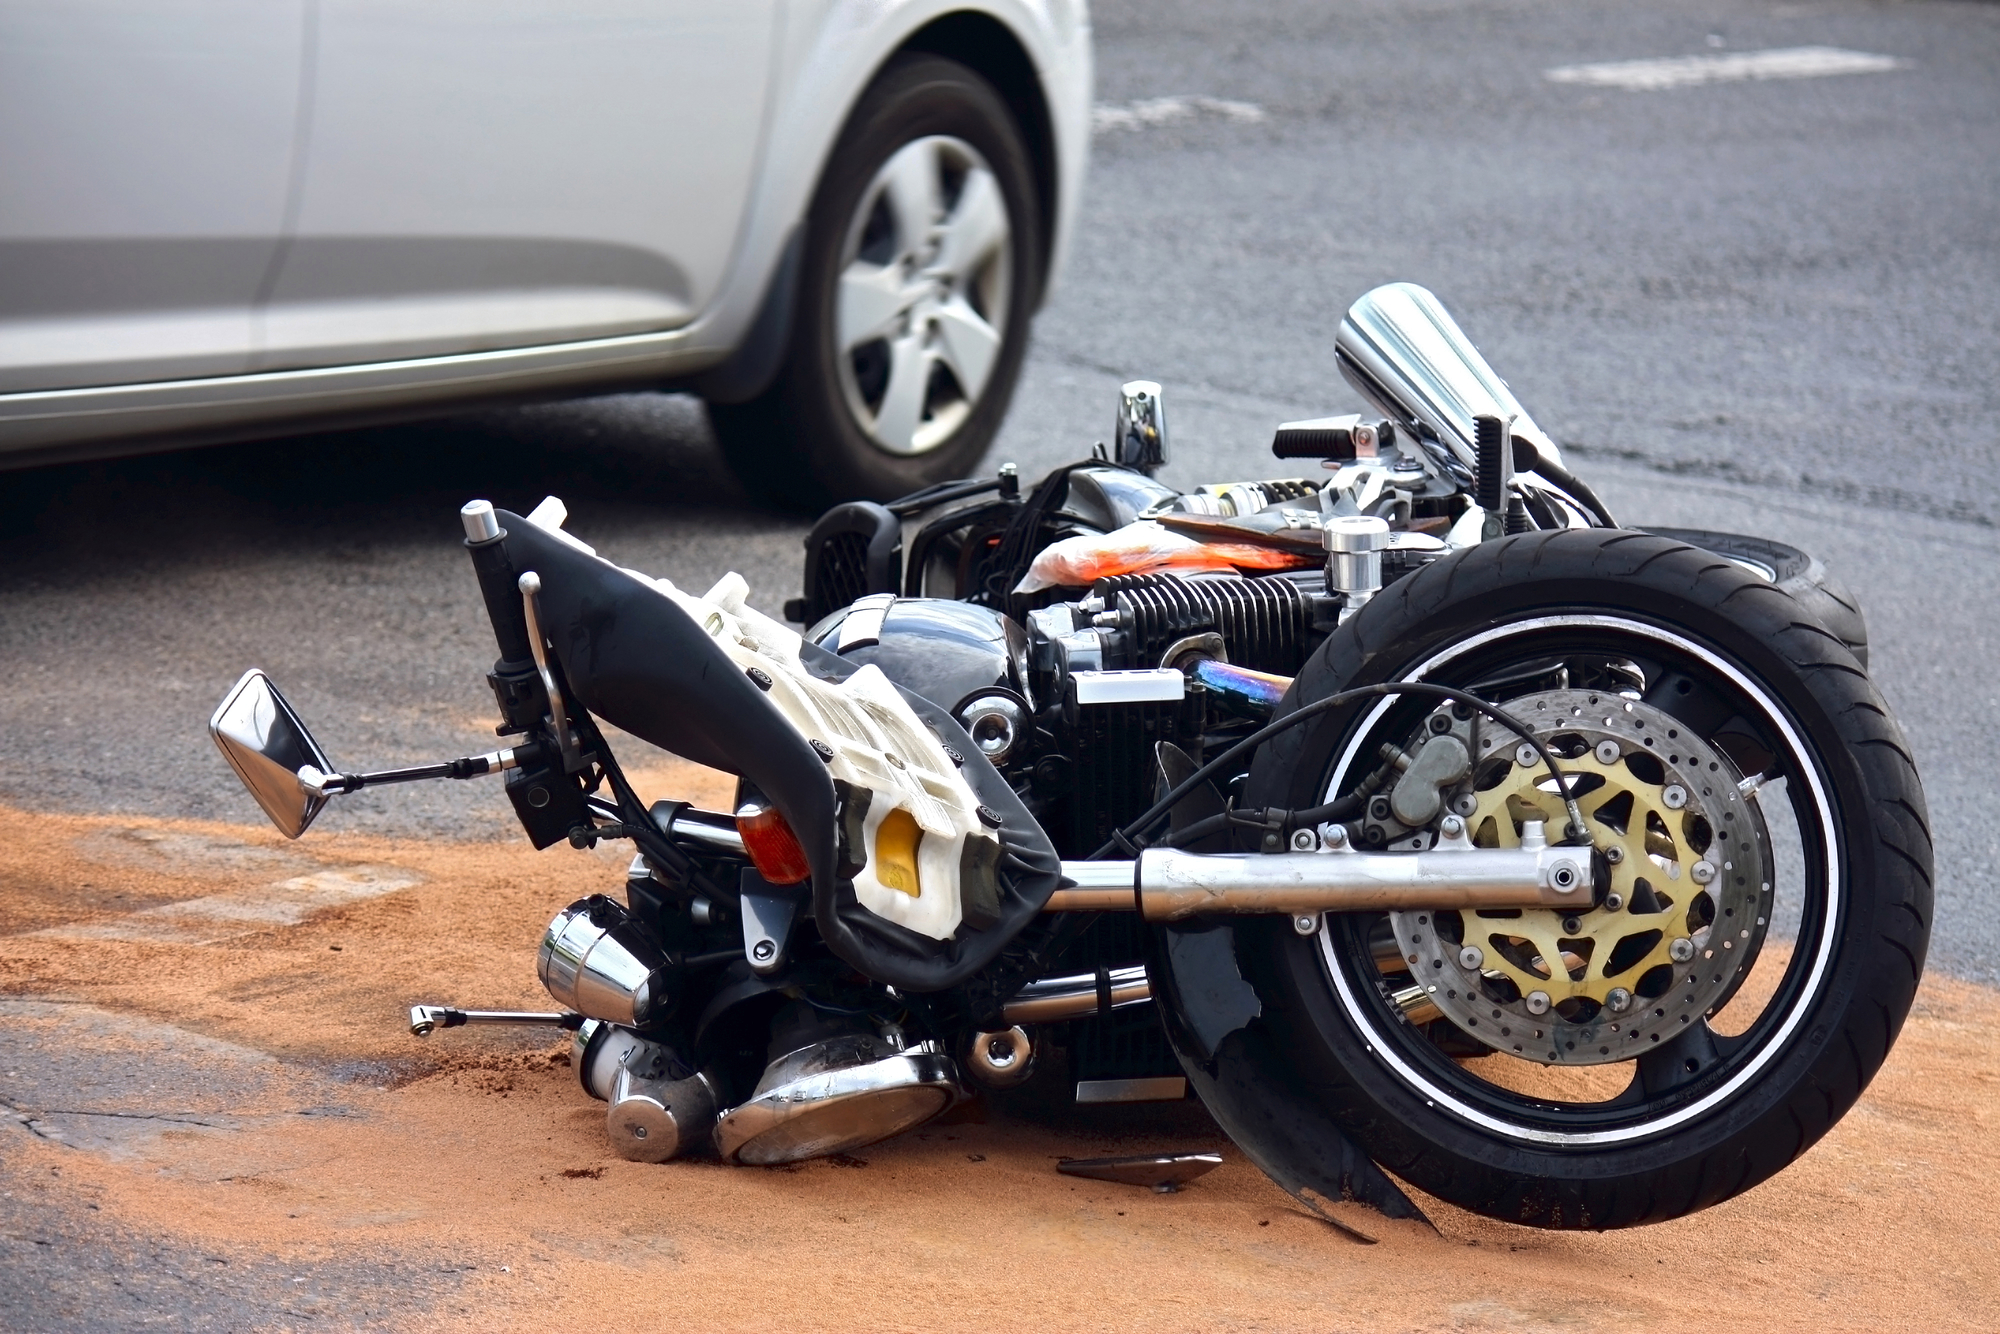 Top Expert Personal Injury Motorcycle Accident Canyon Crest CA 92507